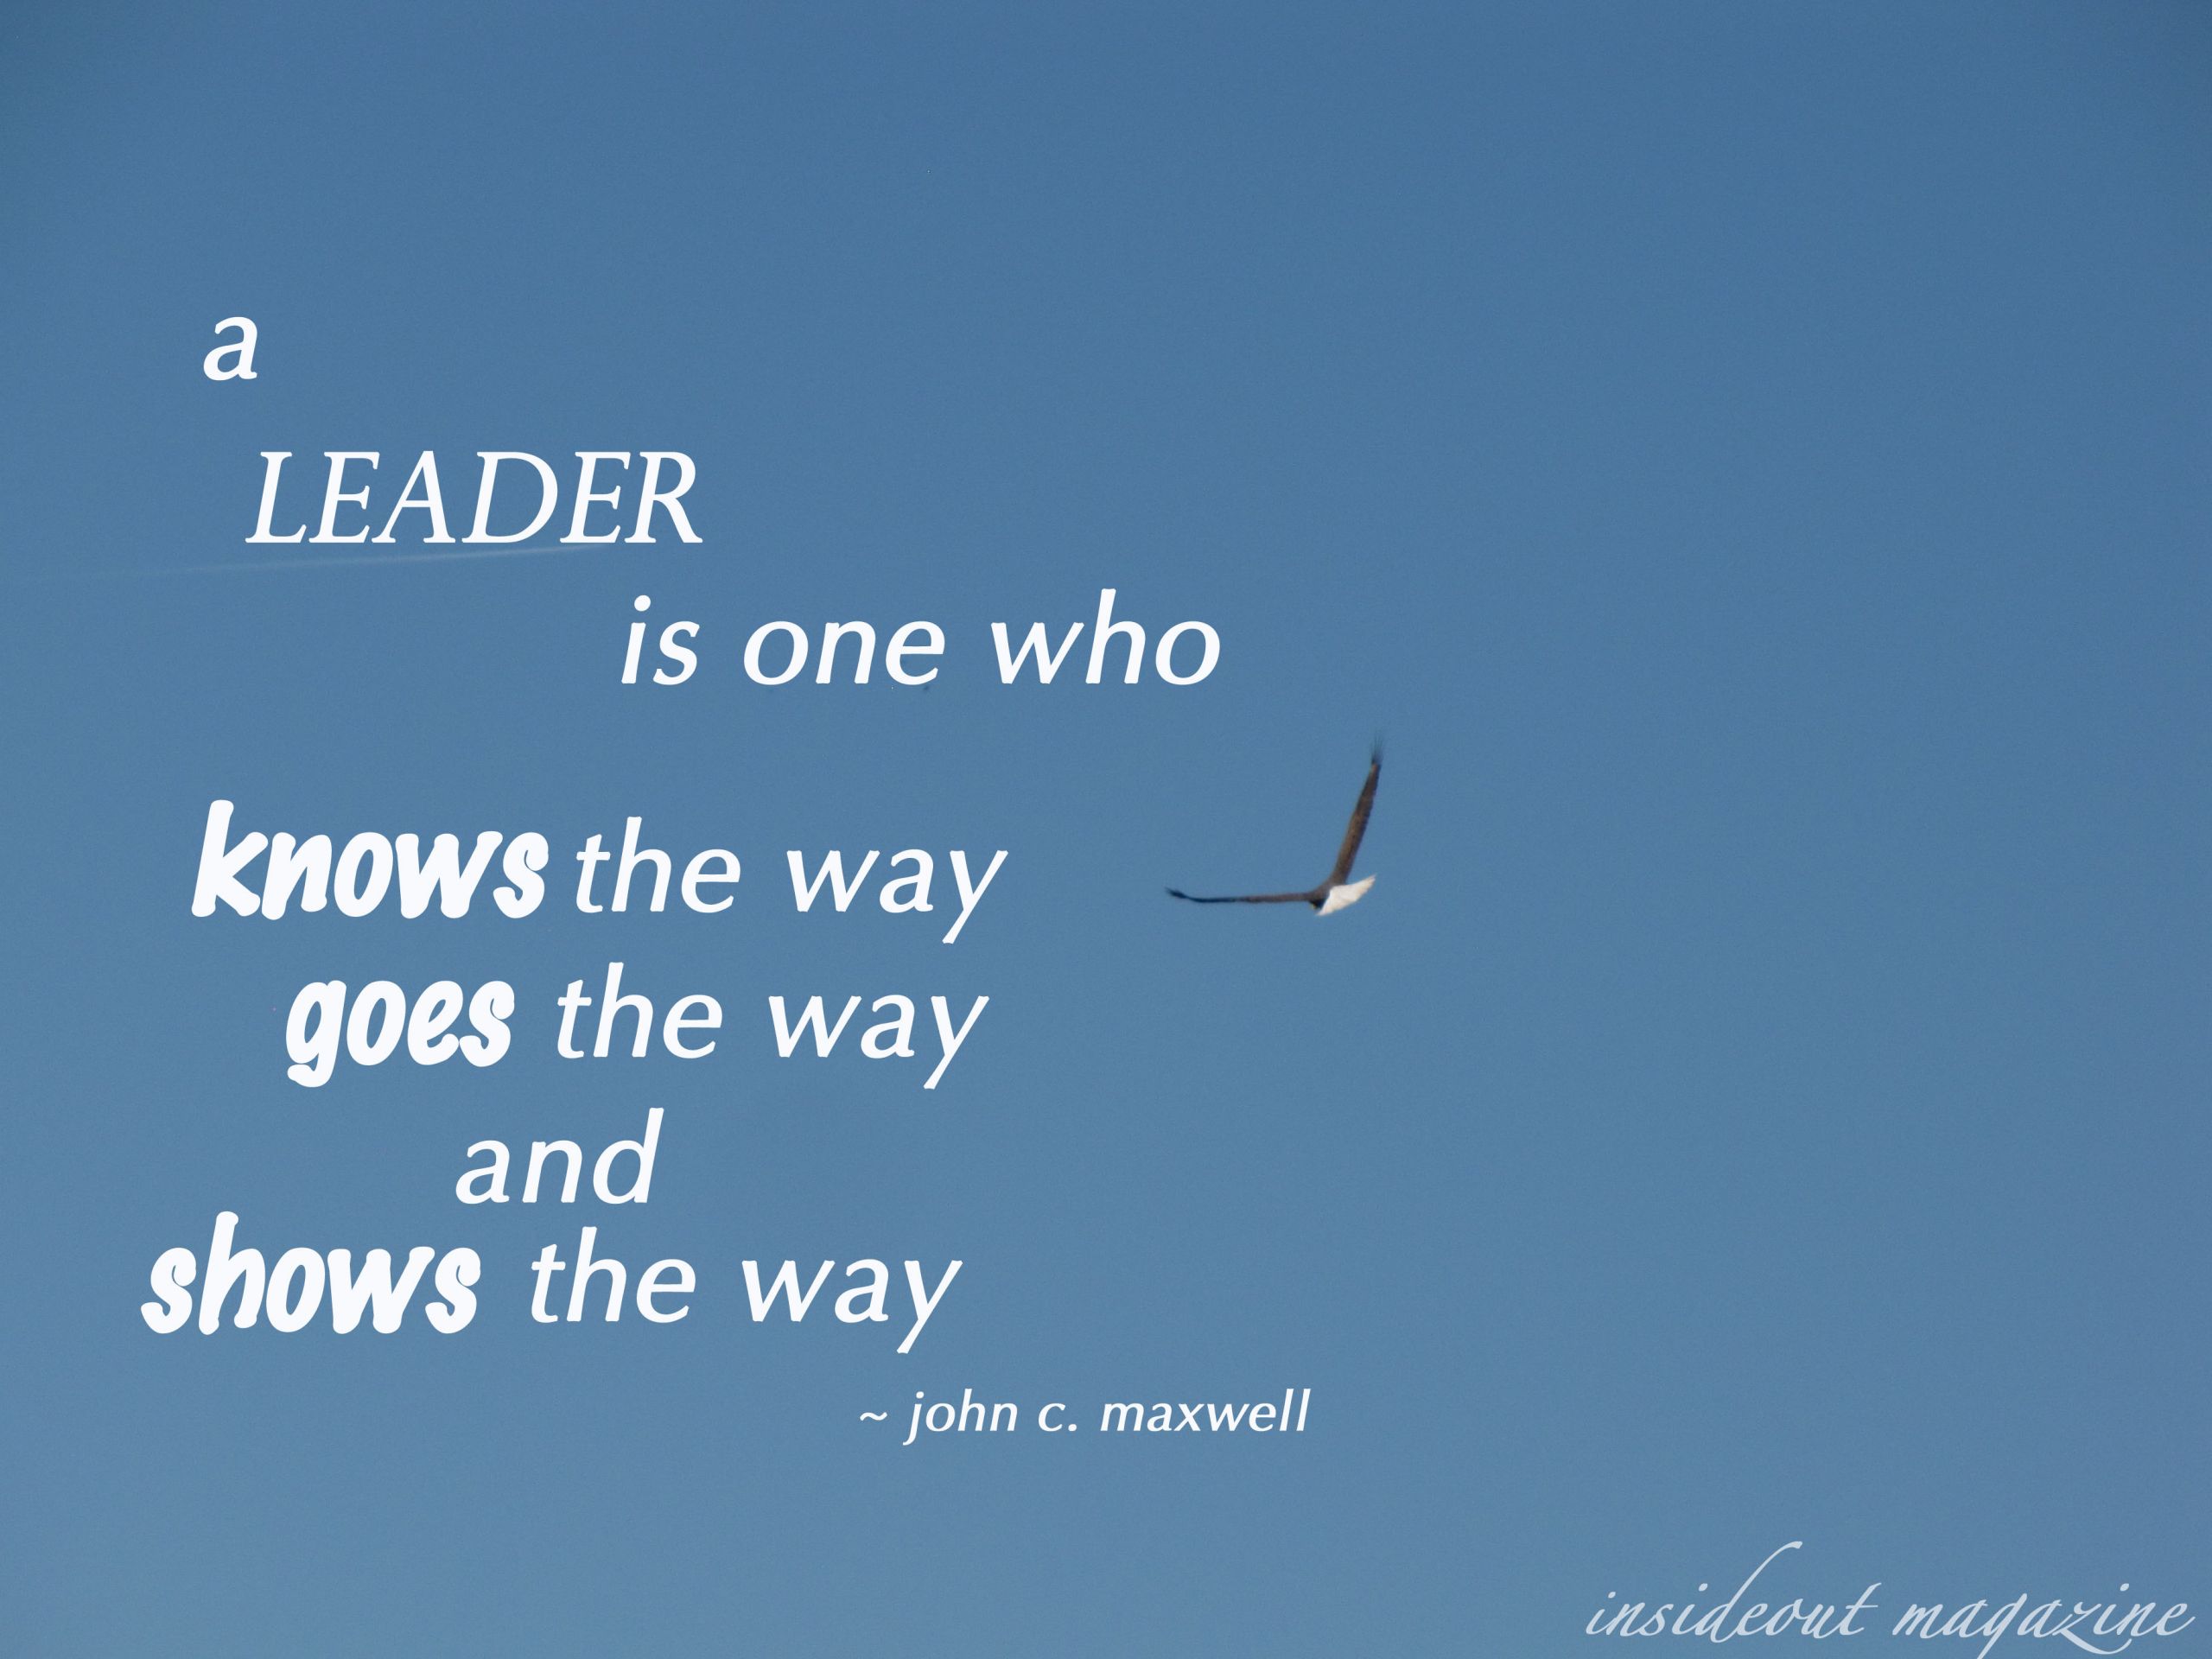 21 Irrefutable Laws Of Leadership Quotes
 Quotes about Leadership christian 30 quotes